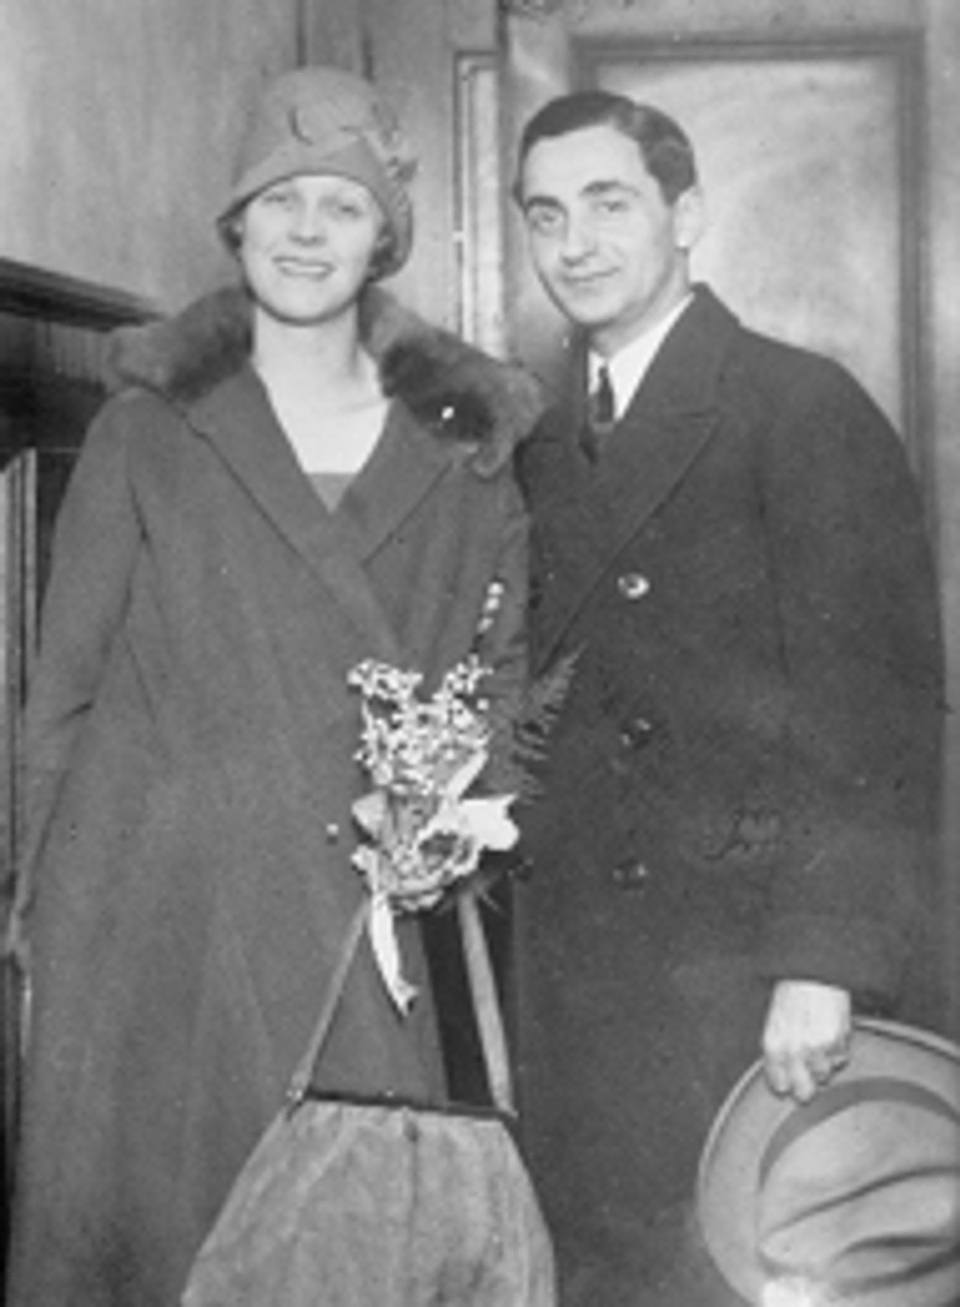 Irving and his second wife, Ellen. Circa 1920.